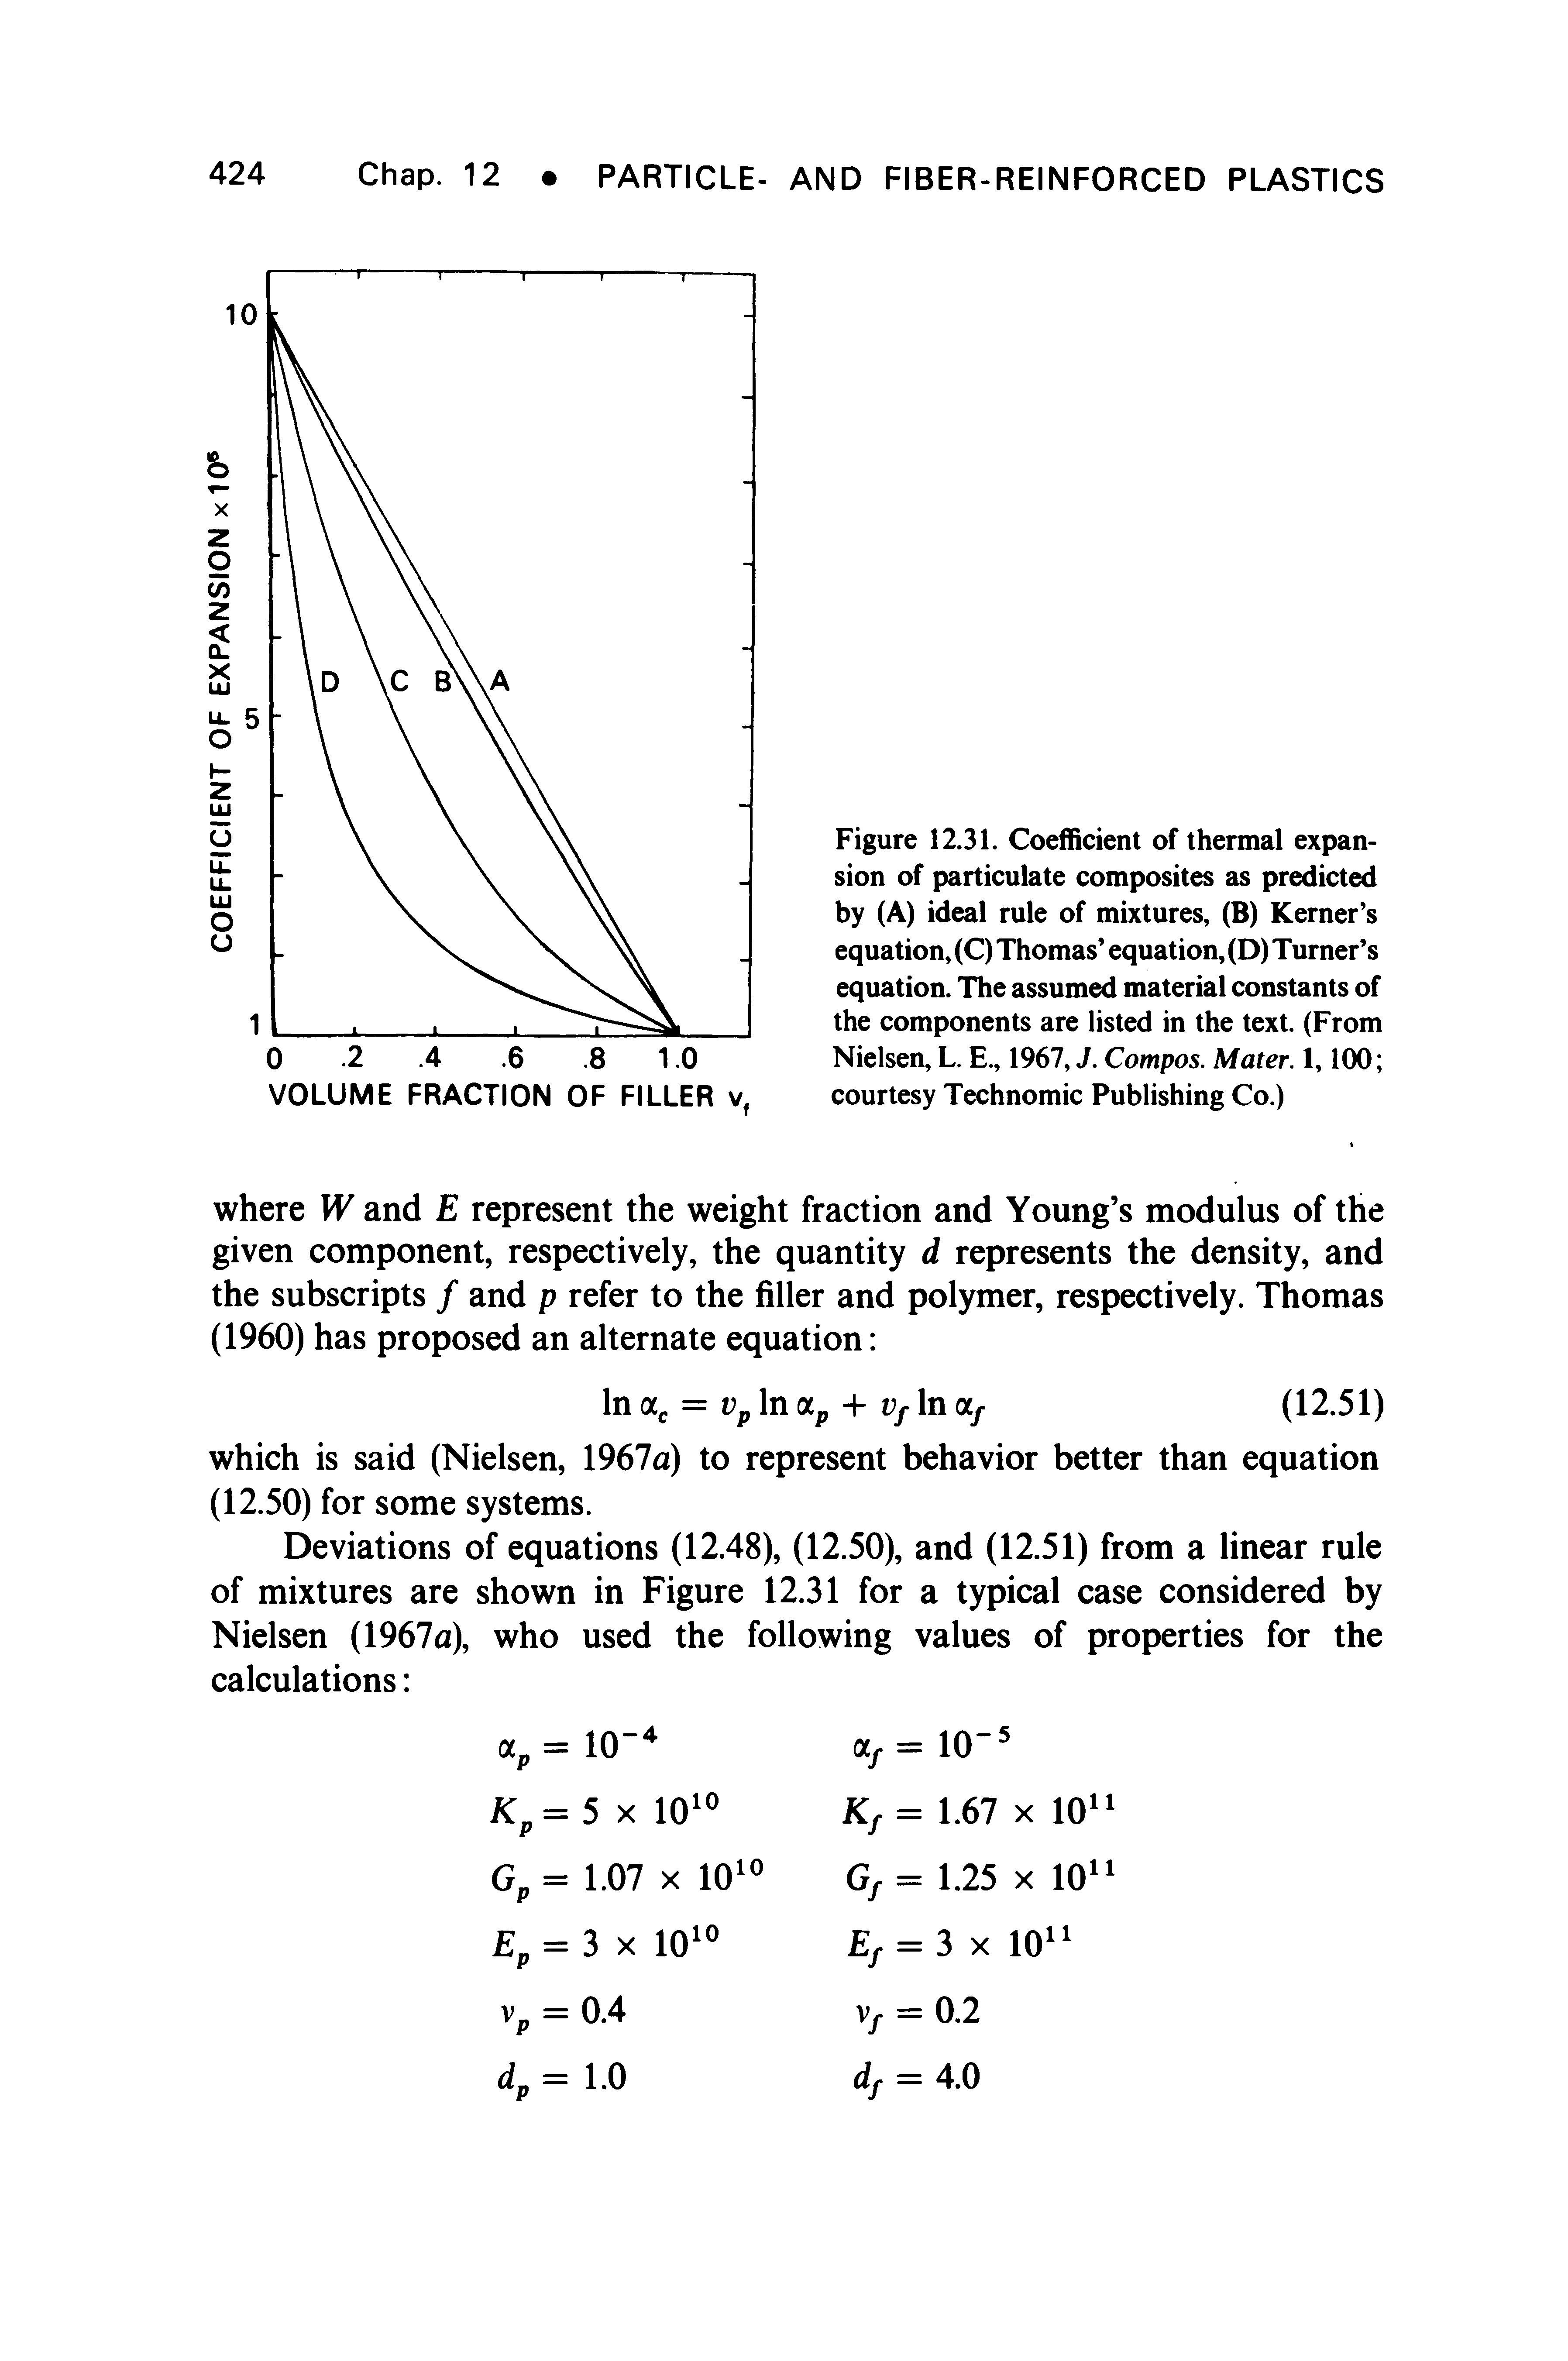 Figure 12.31. Coefficient of thermal expansion of particulate composites as predicted by (A) ideal rule of mixtures, (B) Kerner s equation, (C) Thomas equation, (D) Turner s equation. The assumed material constants of the components are listed in the text. (From Nielsen, L. E., 1967, J. Compos. Mater. 1,100 courtesy Technomic Publishing Co.)...